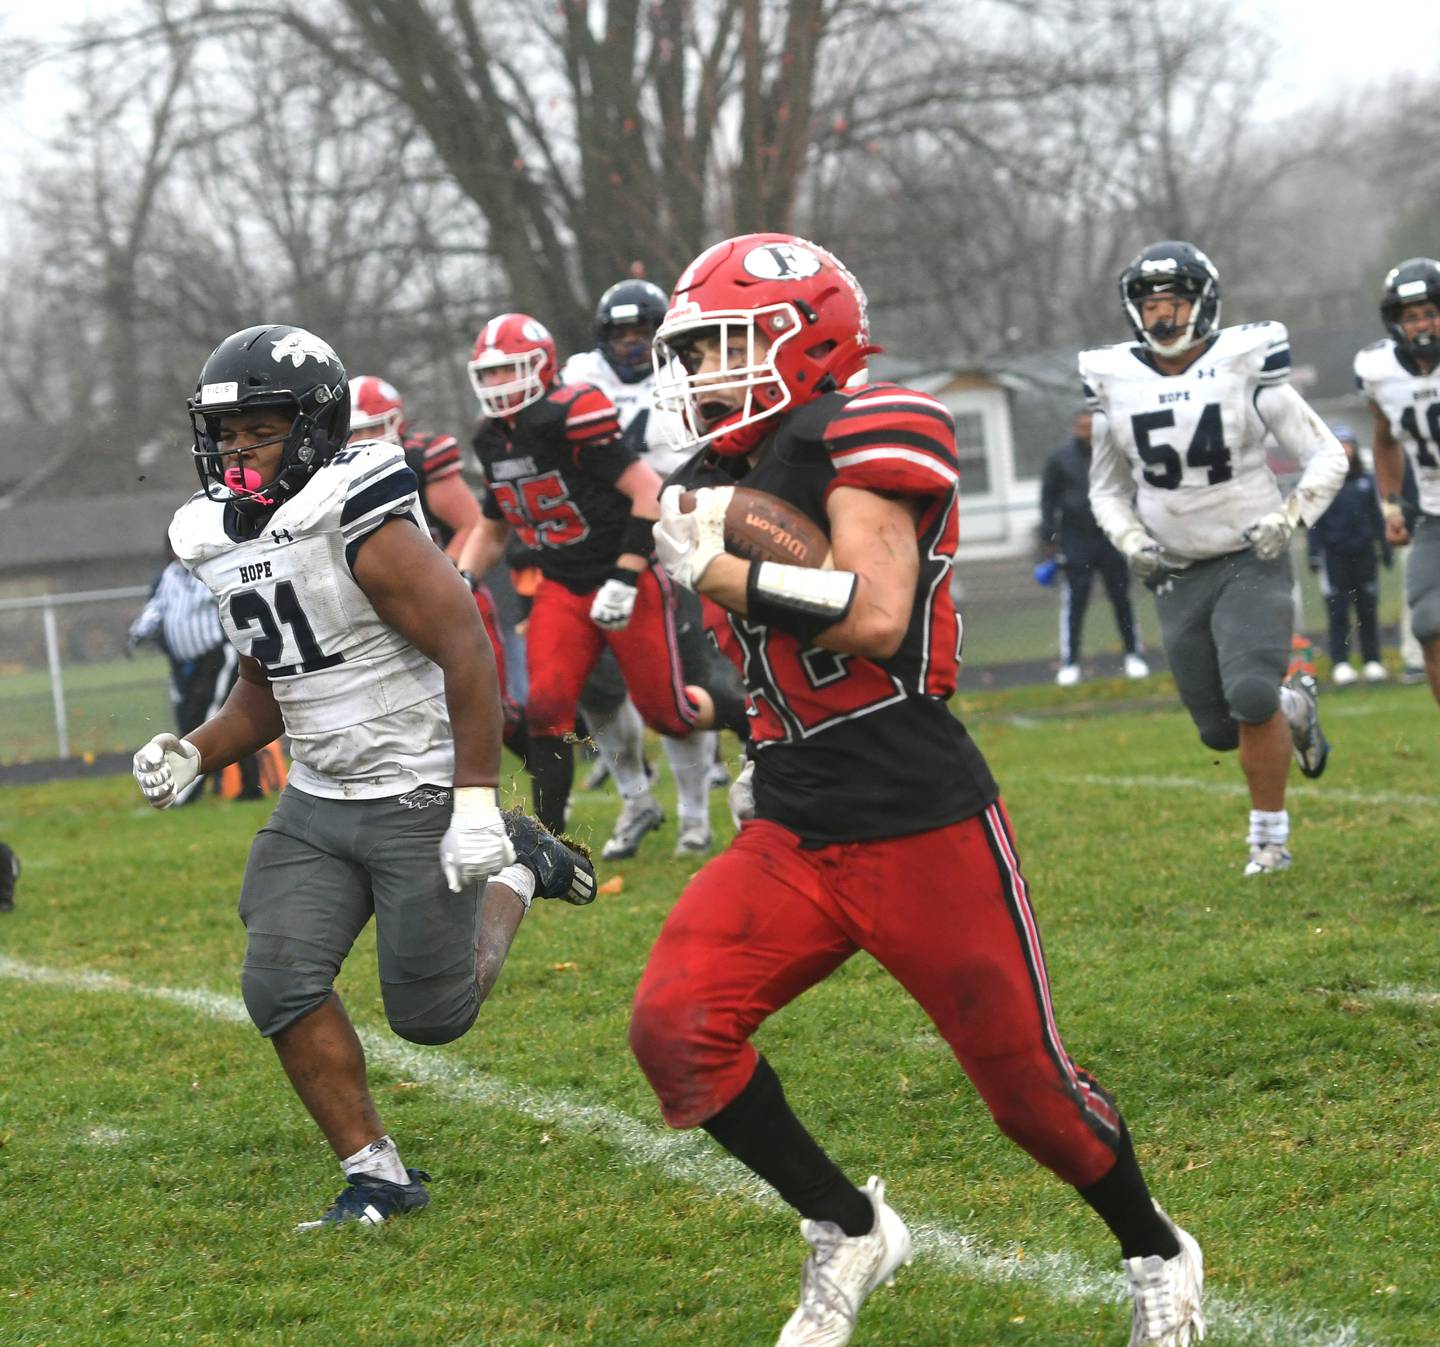 Forreston's Kaleb Sanders runs ahead of Chicago Hope Academy defenders en route to the end zone during 1A playoff action in Forreston on Saturday, Nov. 5. The Cardinals won the game 44-16 to advance to quarterfinals against Dakota.